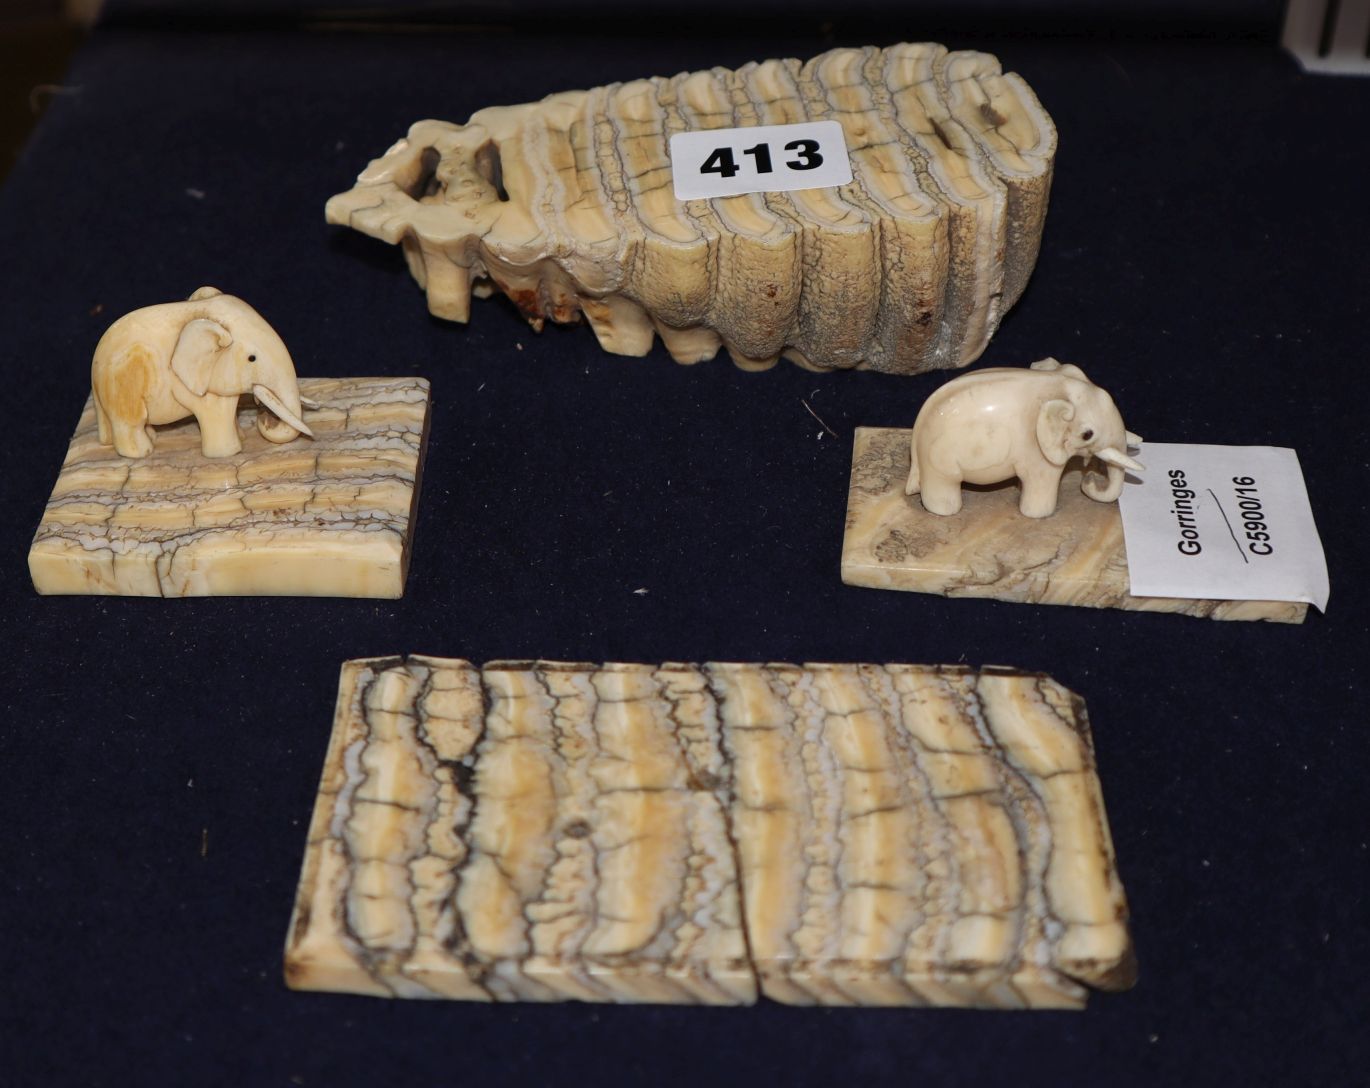 Two ivory elephant figures with elephant tooth stands and two elephant tooth specimens, early 20th